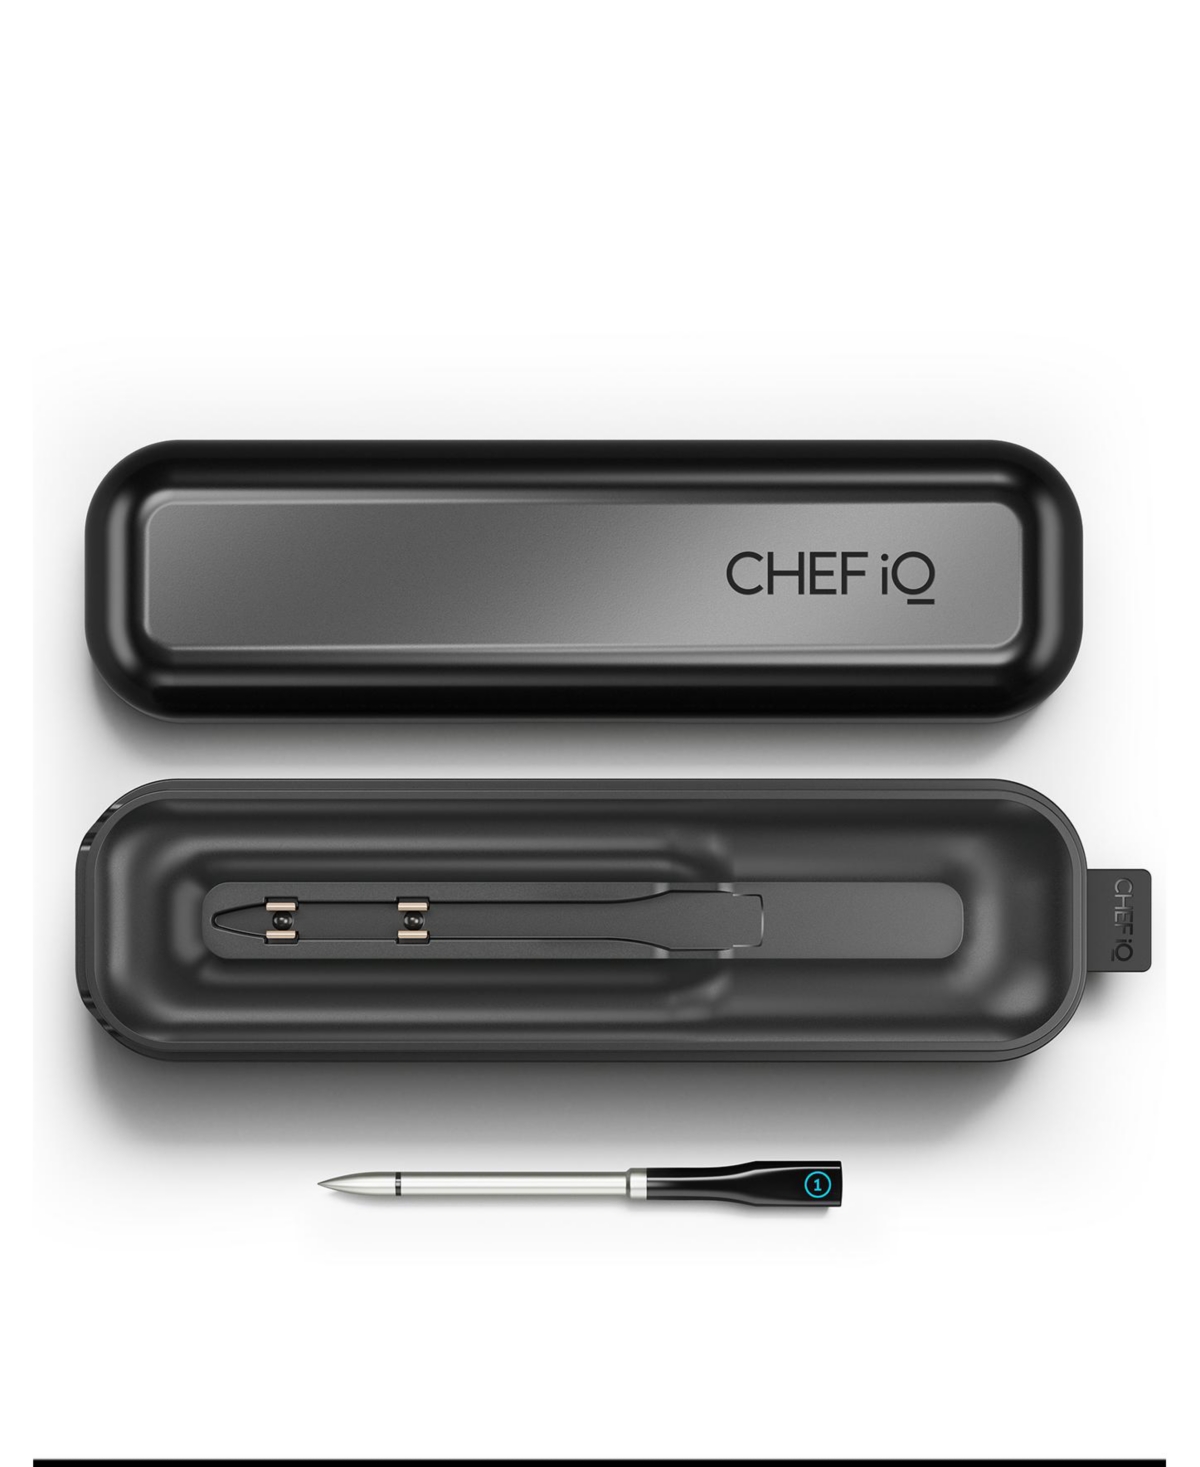 Chefman Chef Iq Smart Cooking Thermometer In Black